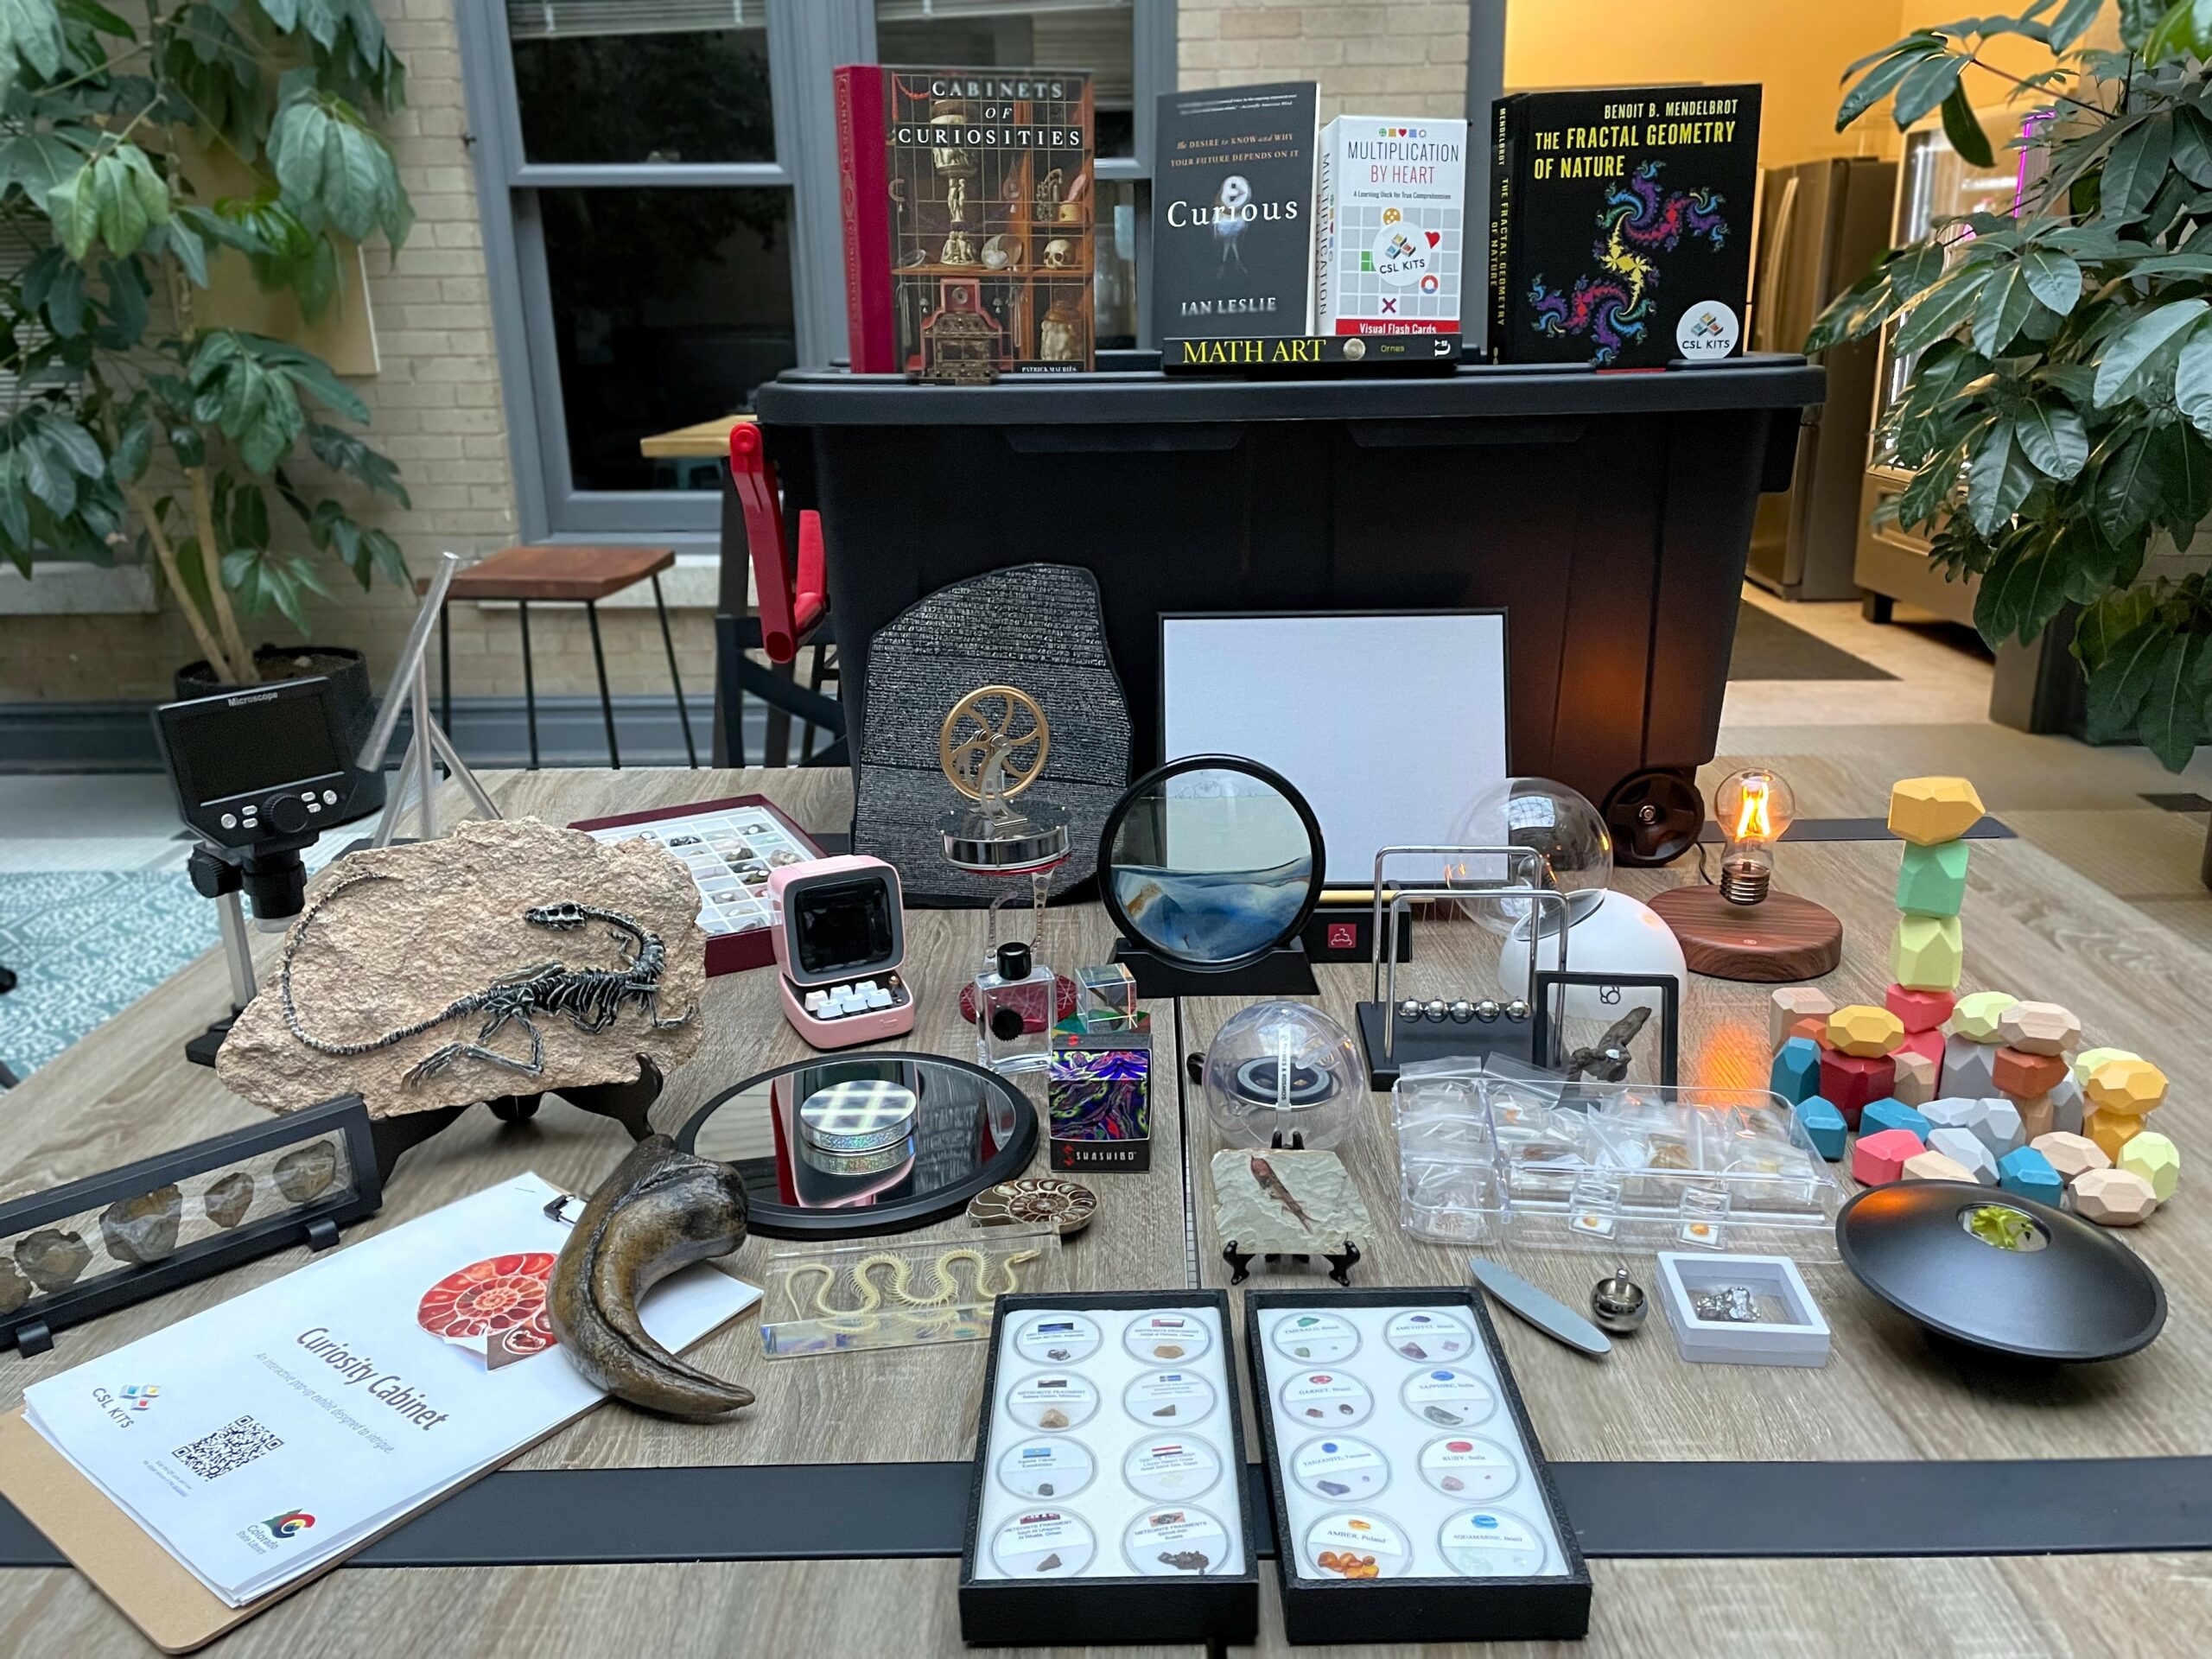 Contents of the kit are shown on a table